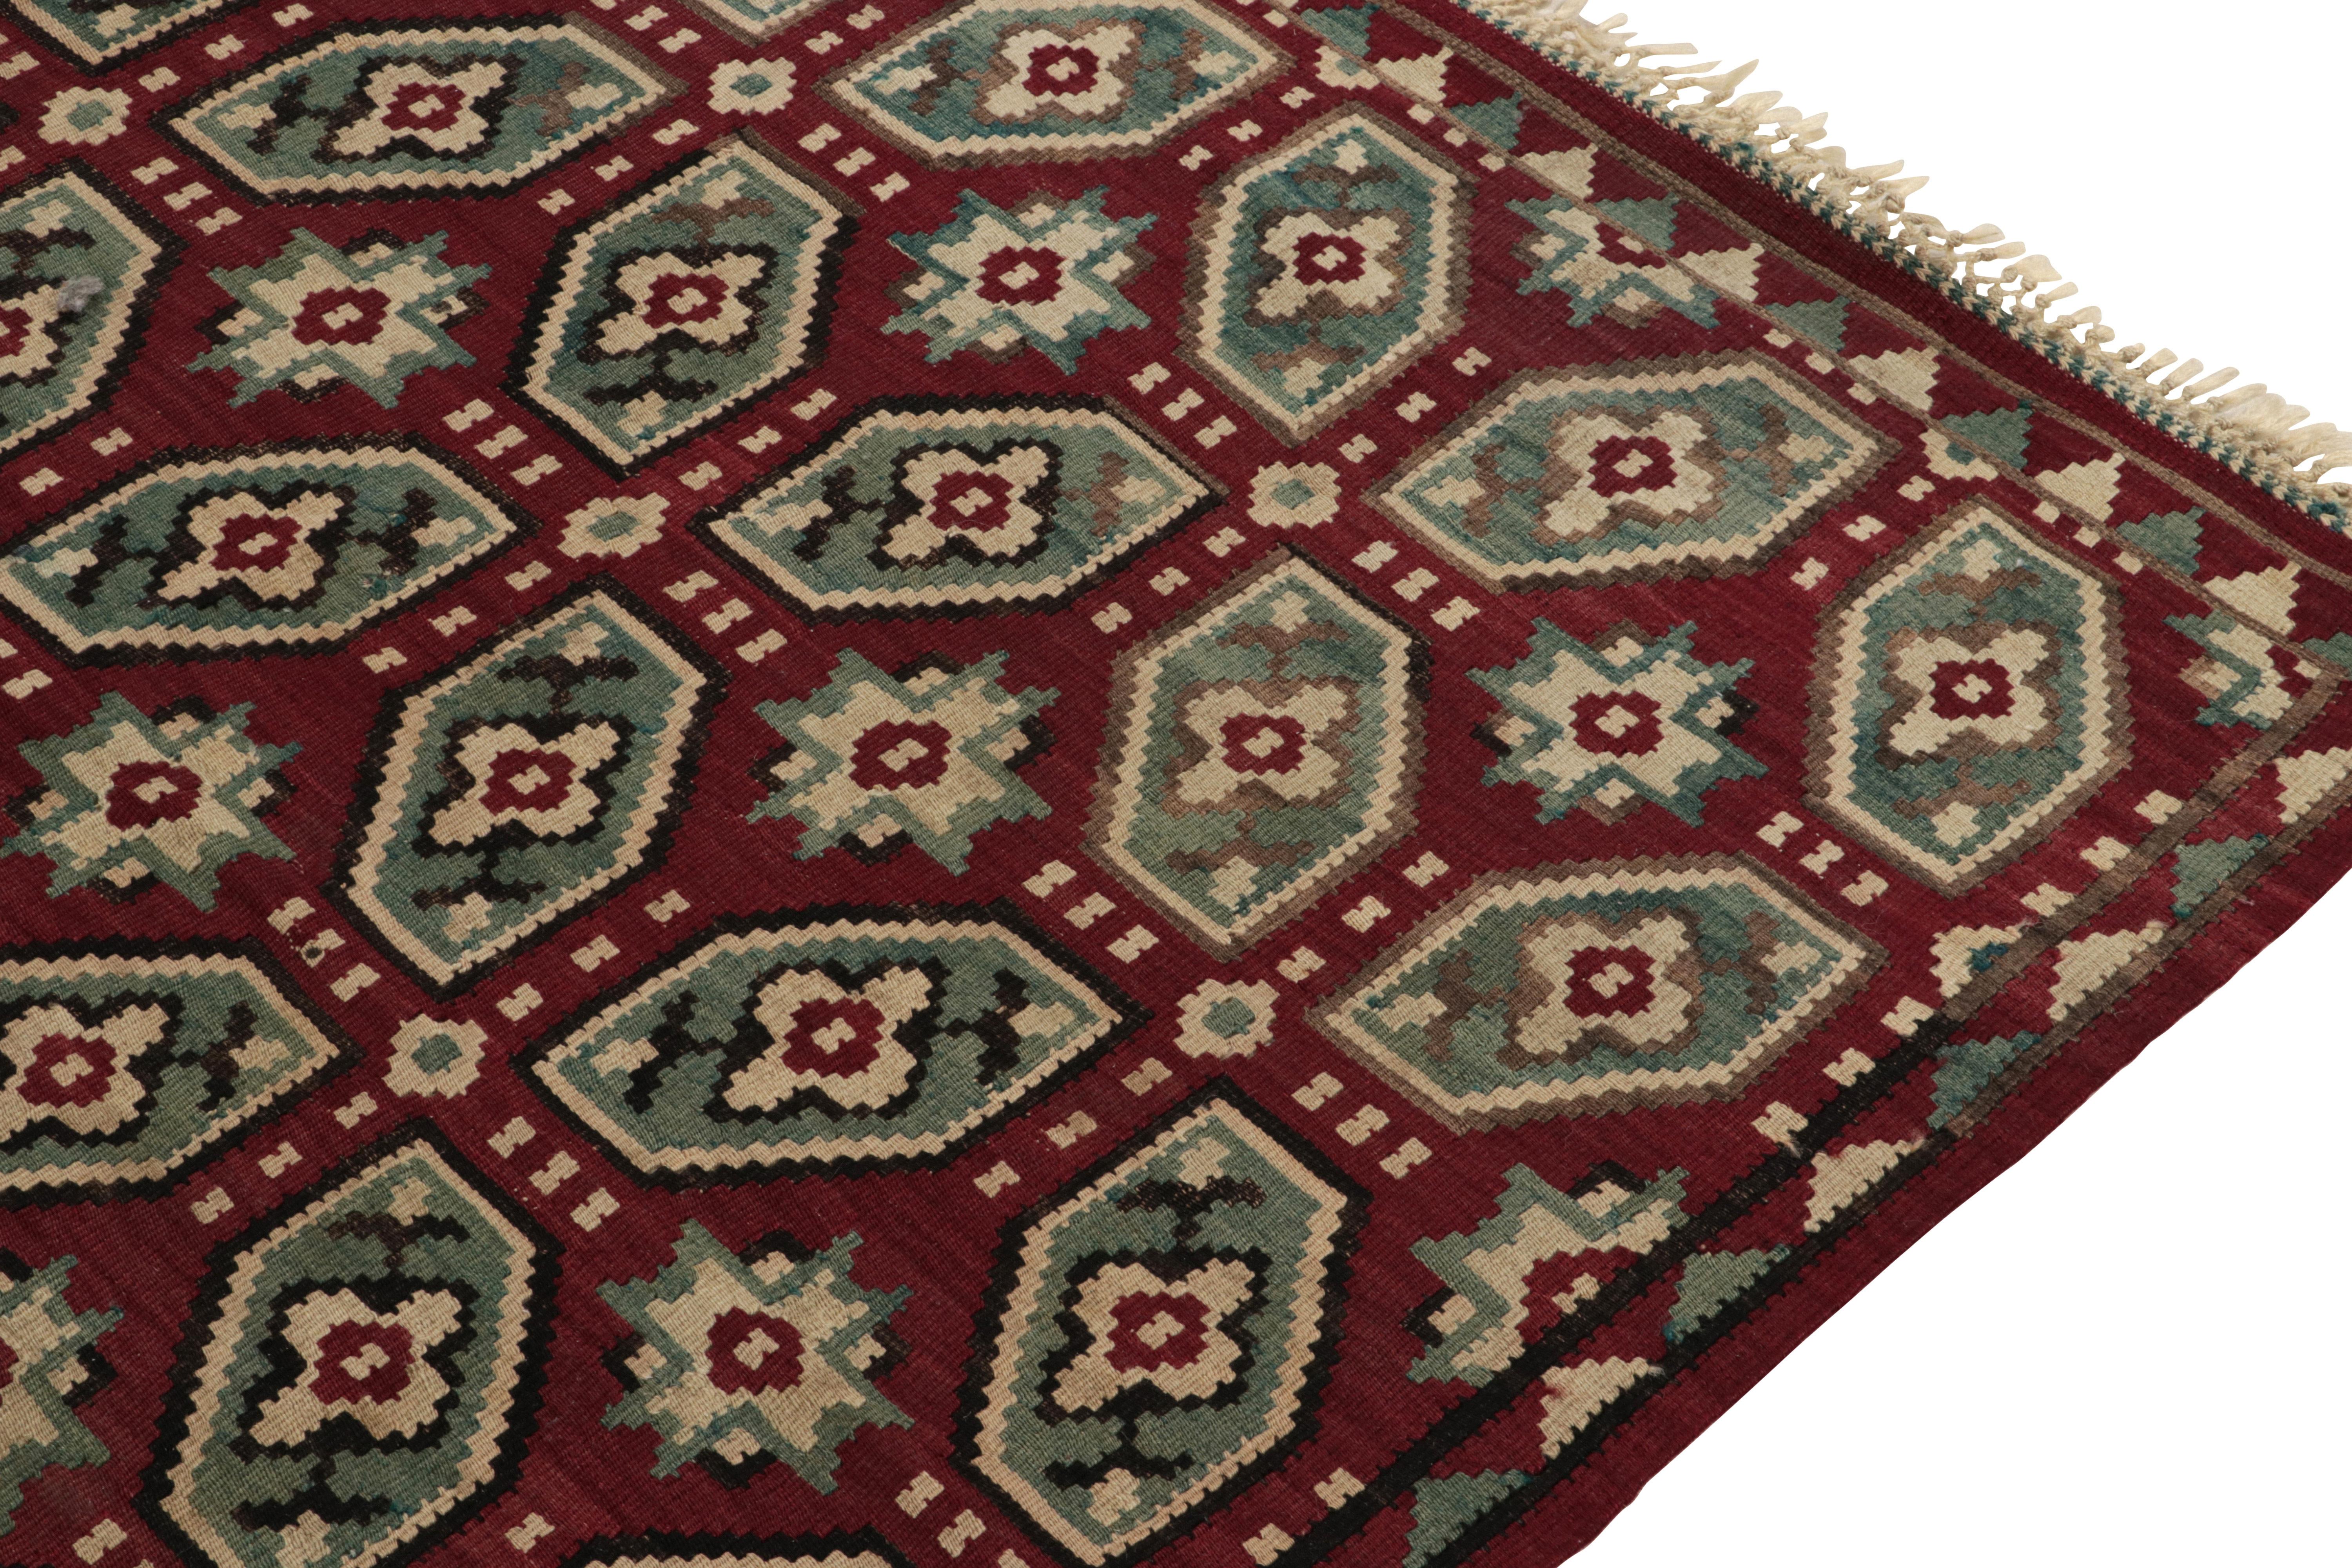 Vintage Kilim Rug in Red, Blue and White Geometric Pattern by Rug & Kilim In Good Condition For Sale In Long Island City, NY